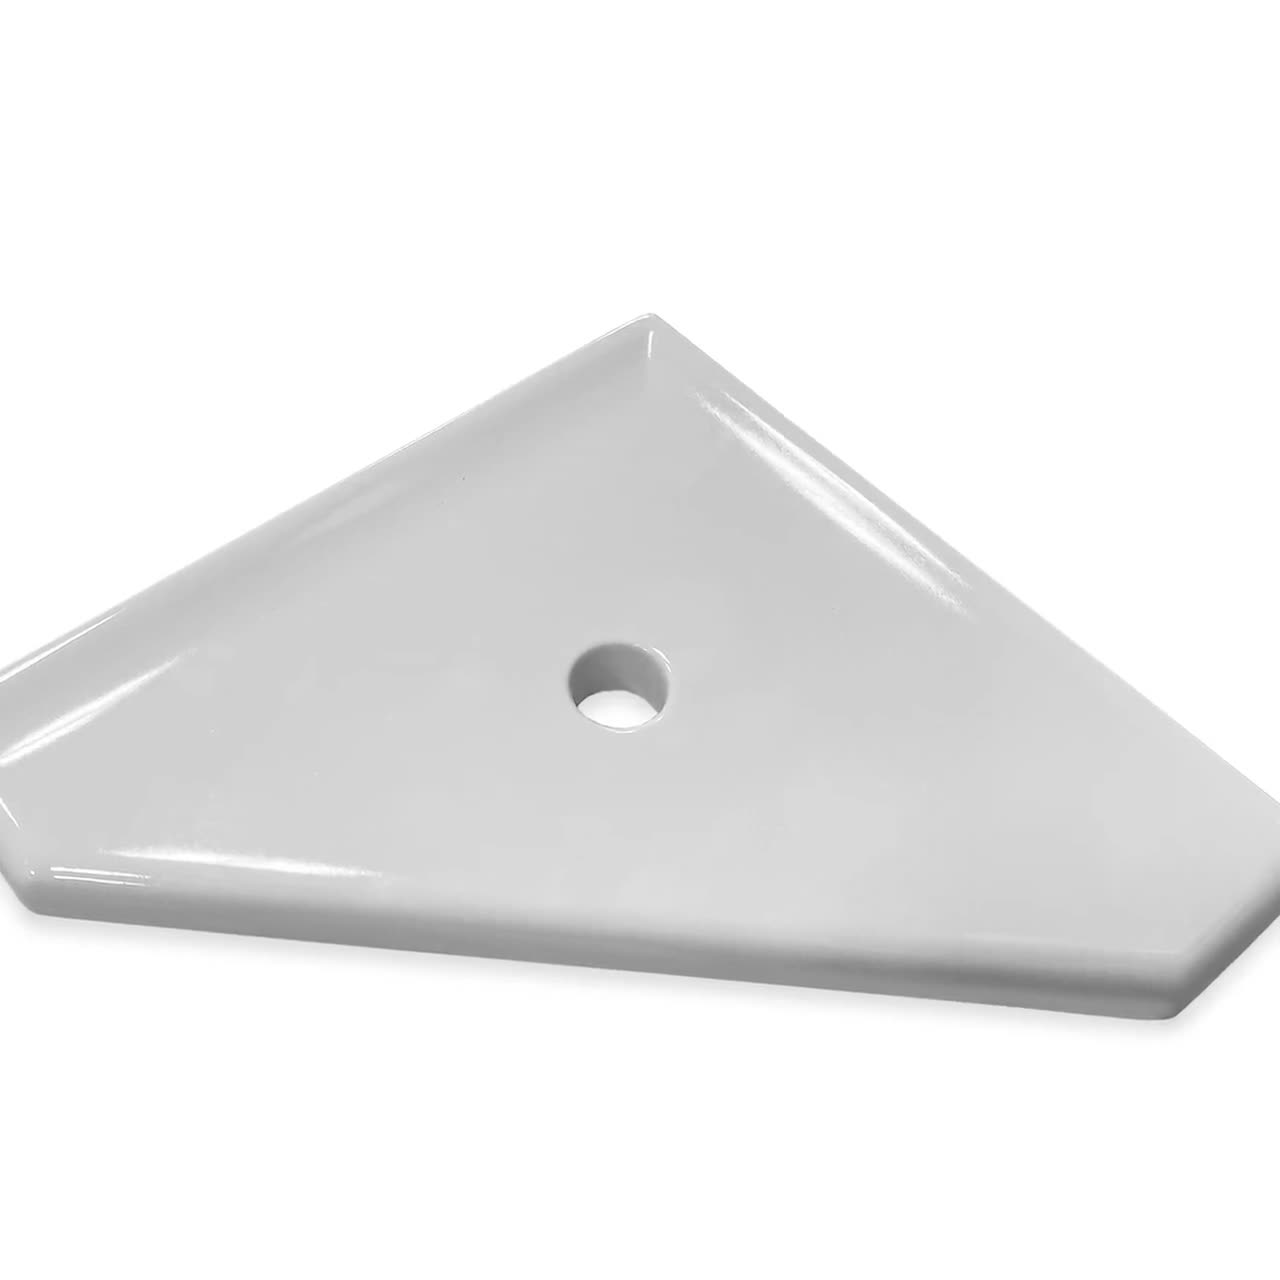 8 Polished White Ceramic Corner Shelf Elegant Shower Shelf with a Drain  Hole (Two sided Tapes Included)